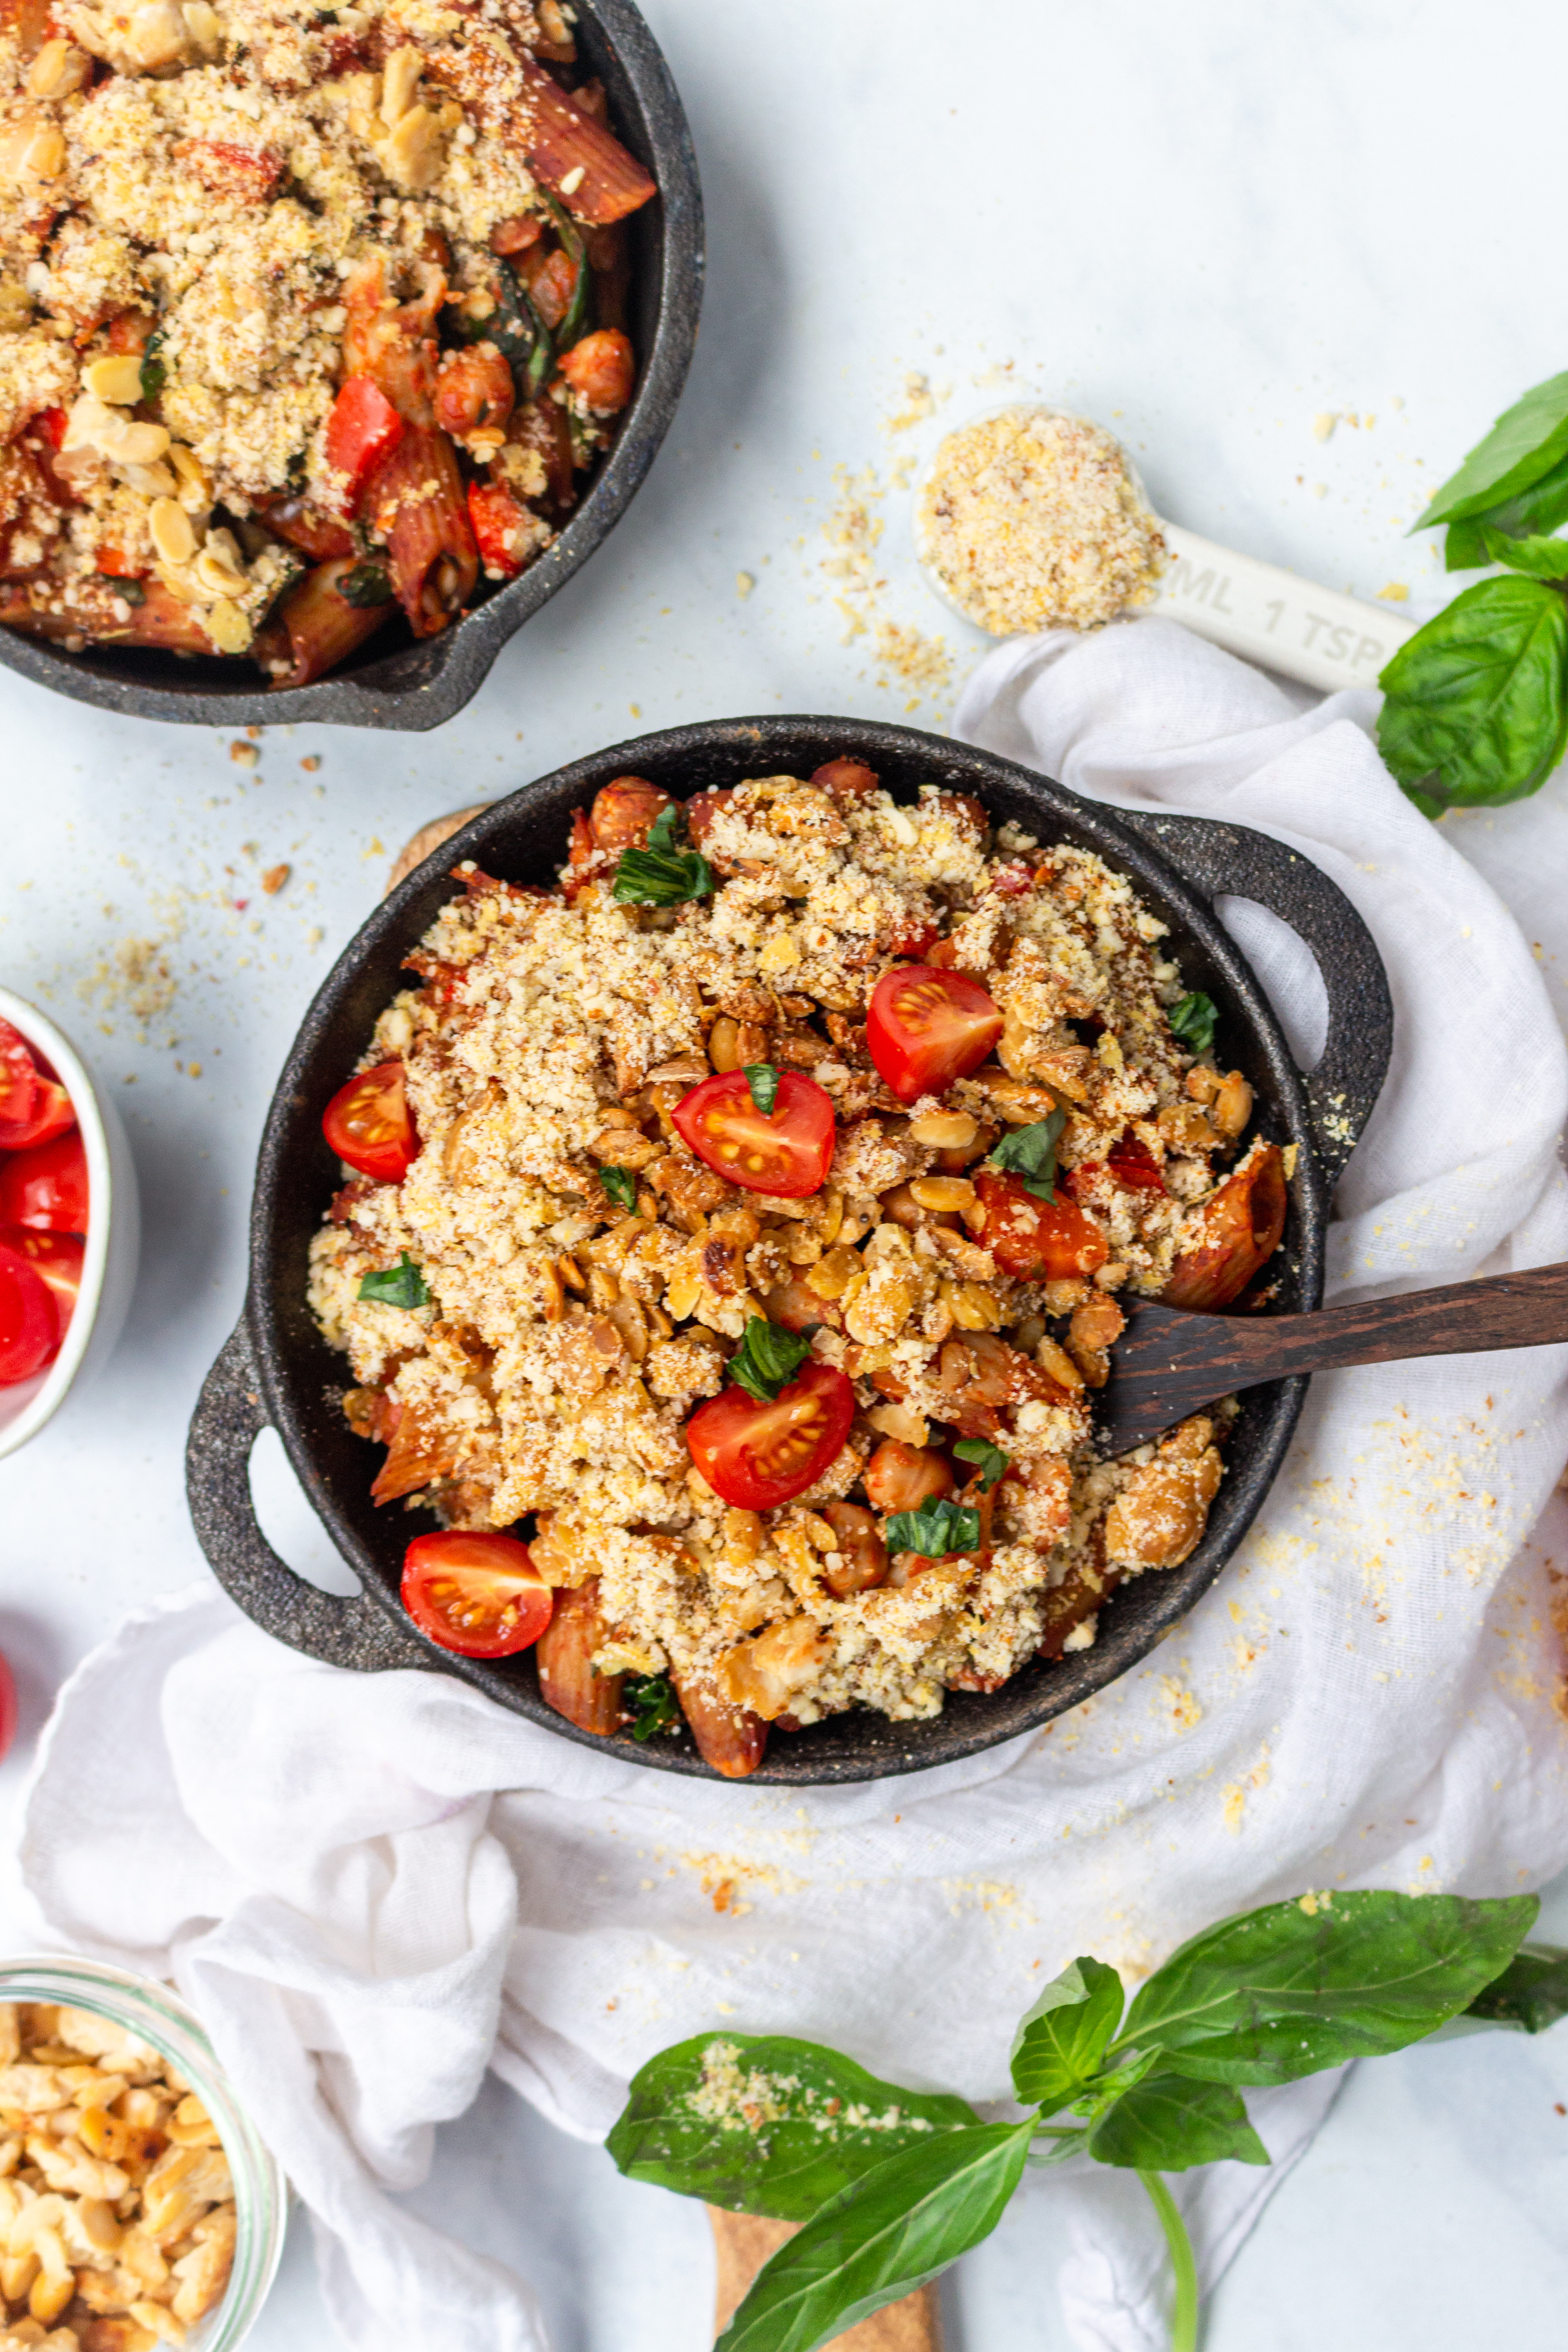 Tomato and Chickpea Pasta Bake with Tempeh Crumble